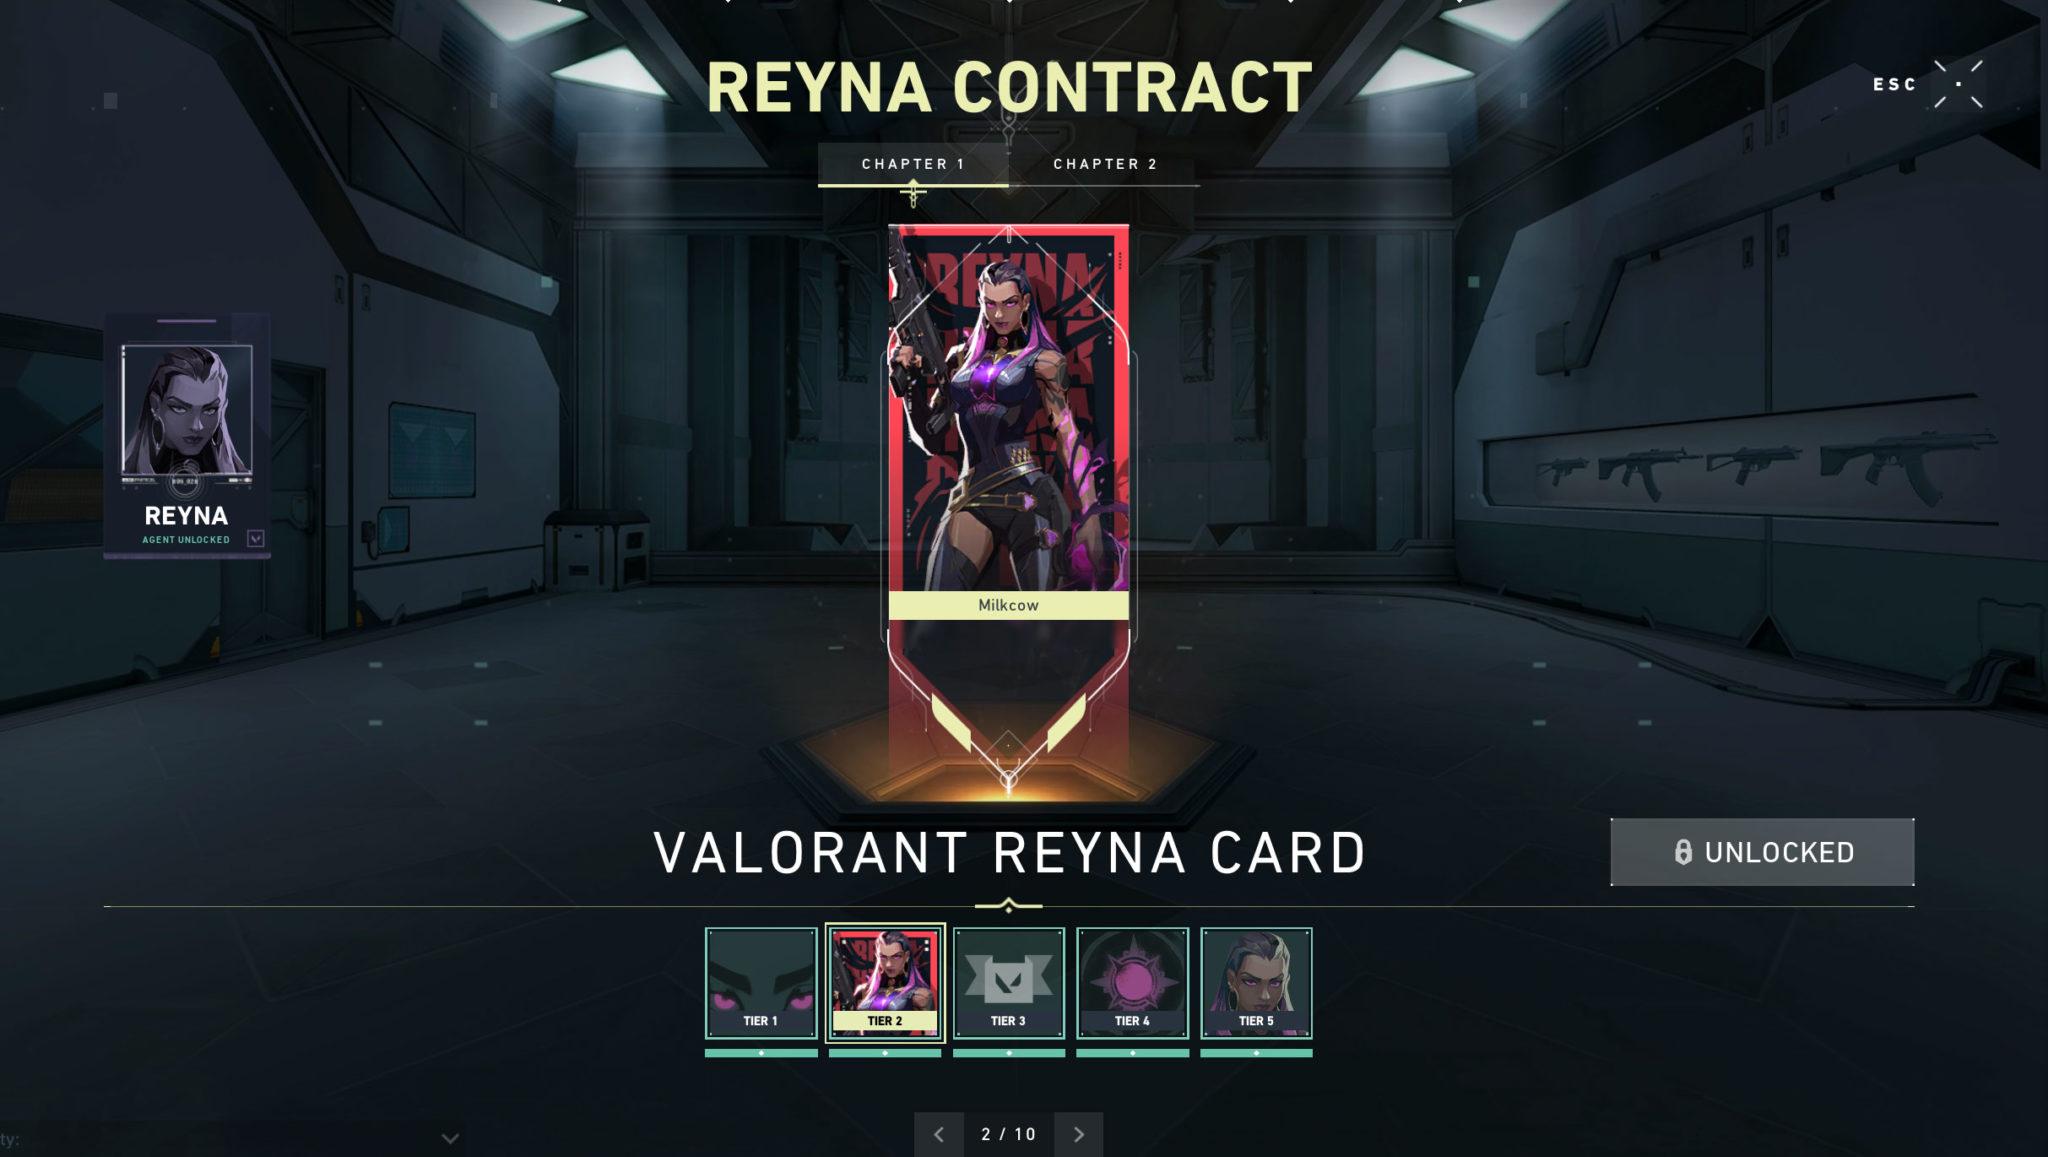 Reyna's Agent Contract in Valorant.